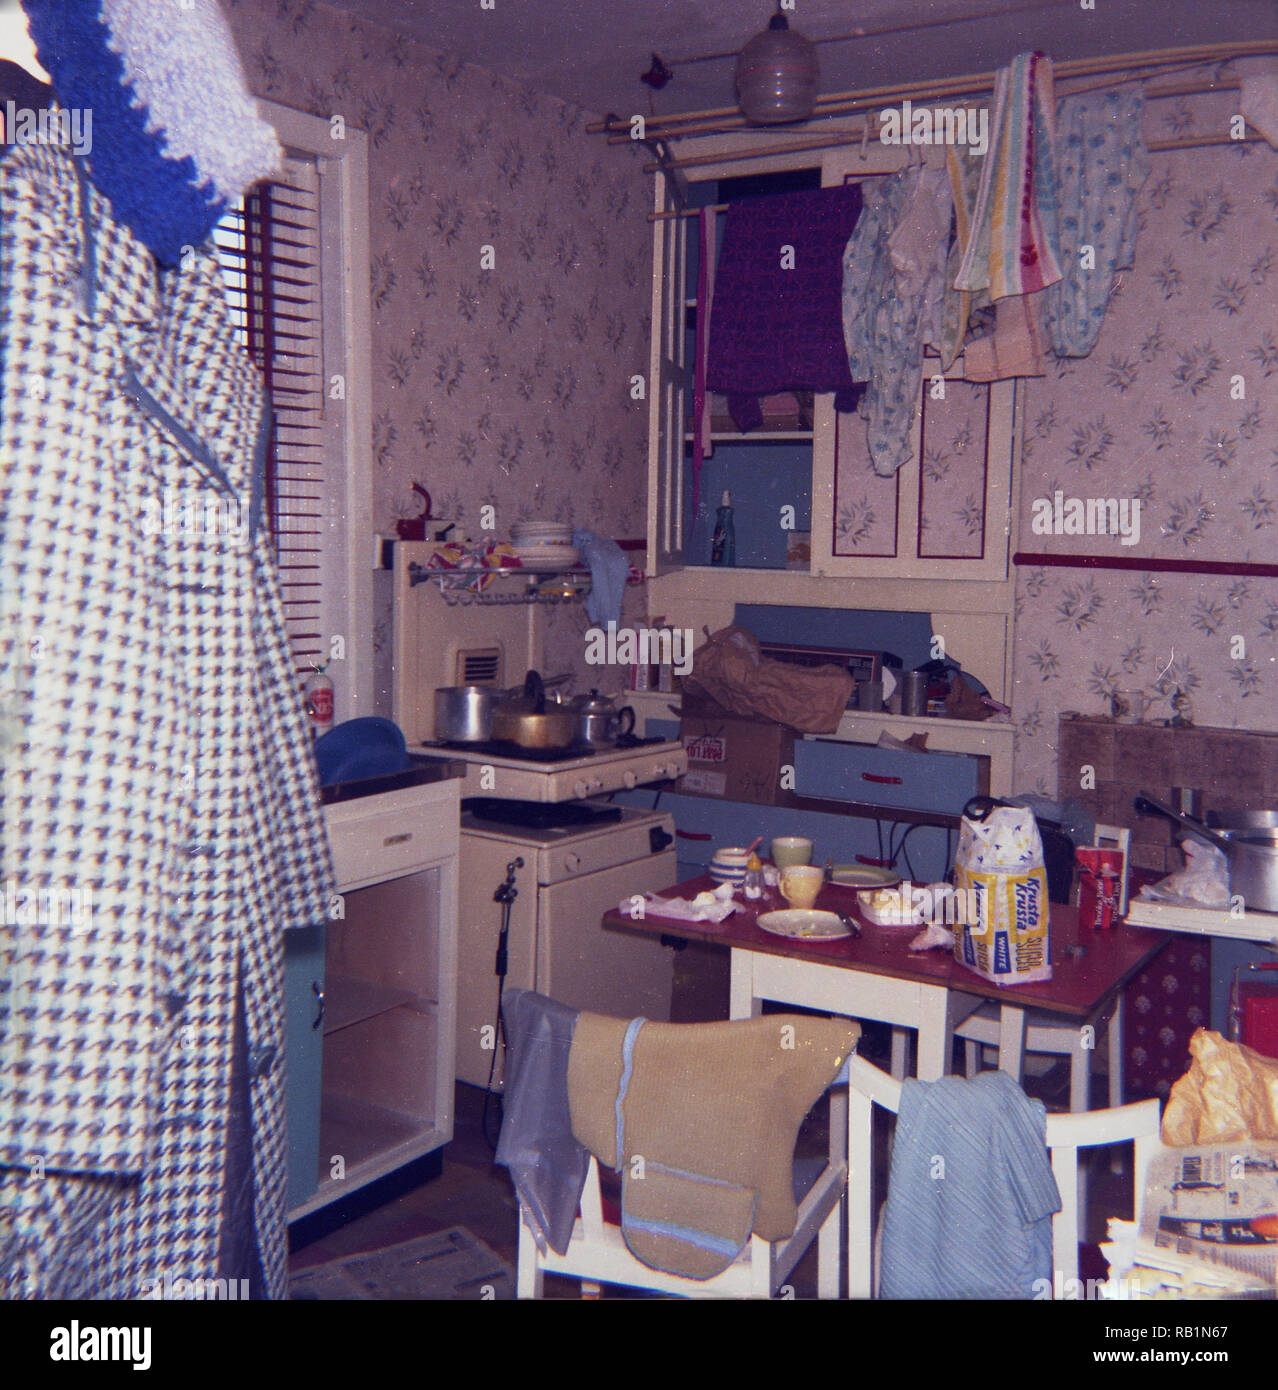 1970s, historical, a small cluttered kitchen, showing products scattered around it and a hanging clothes or washing line. Stock Photo